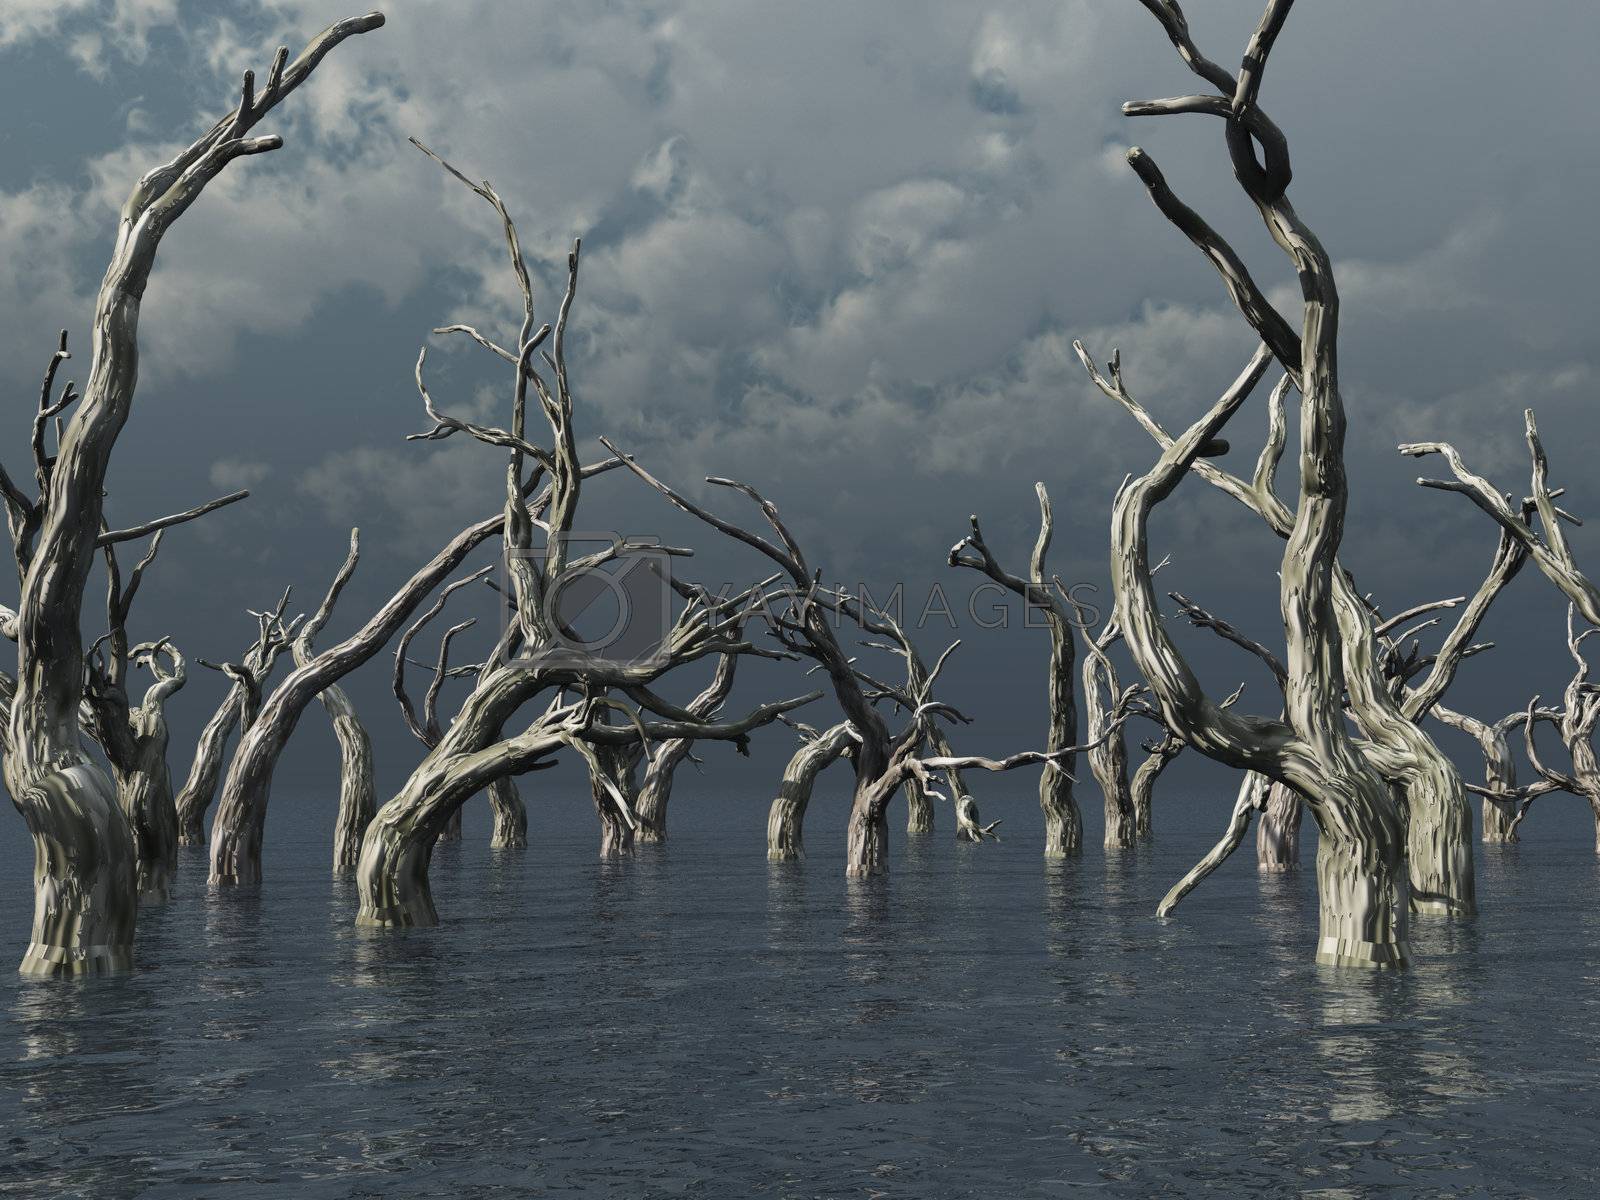 Royalty free image of dead trees by drizzd